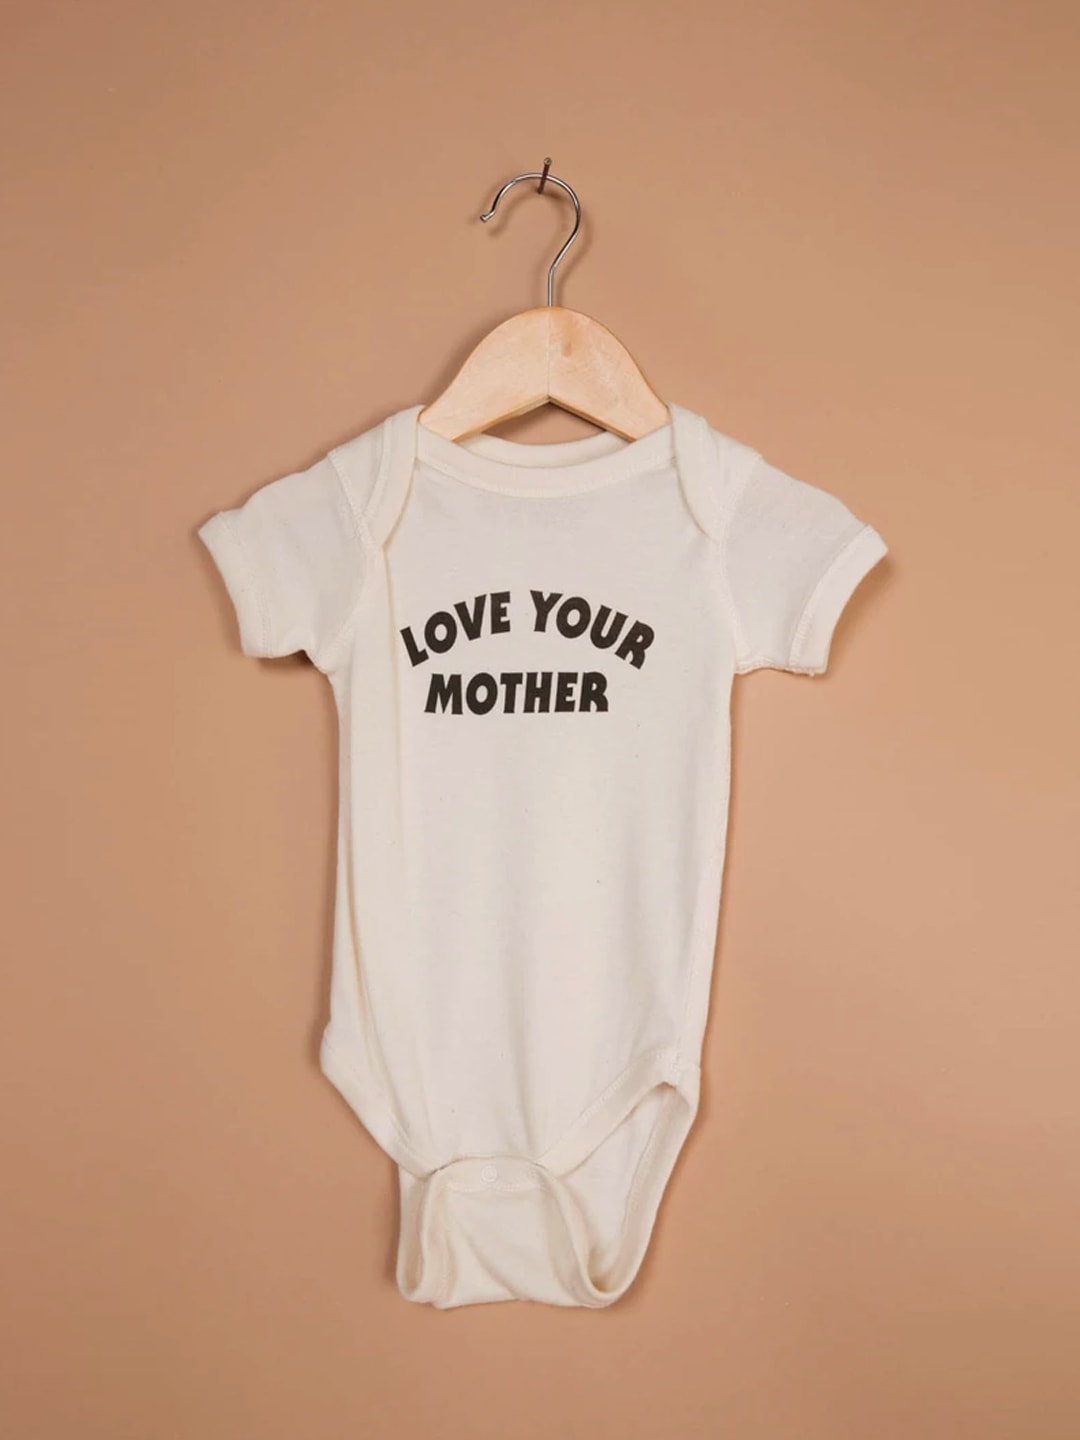 The Bee & The Fox Love Your Mother Onesie, The Bee & The Fox bodi Love Your Mother